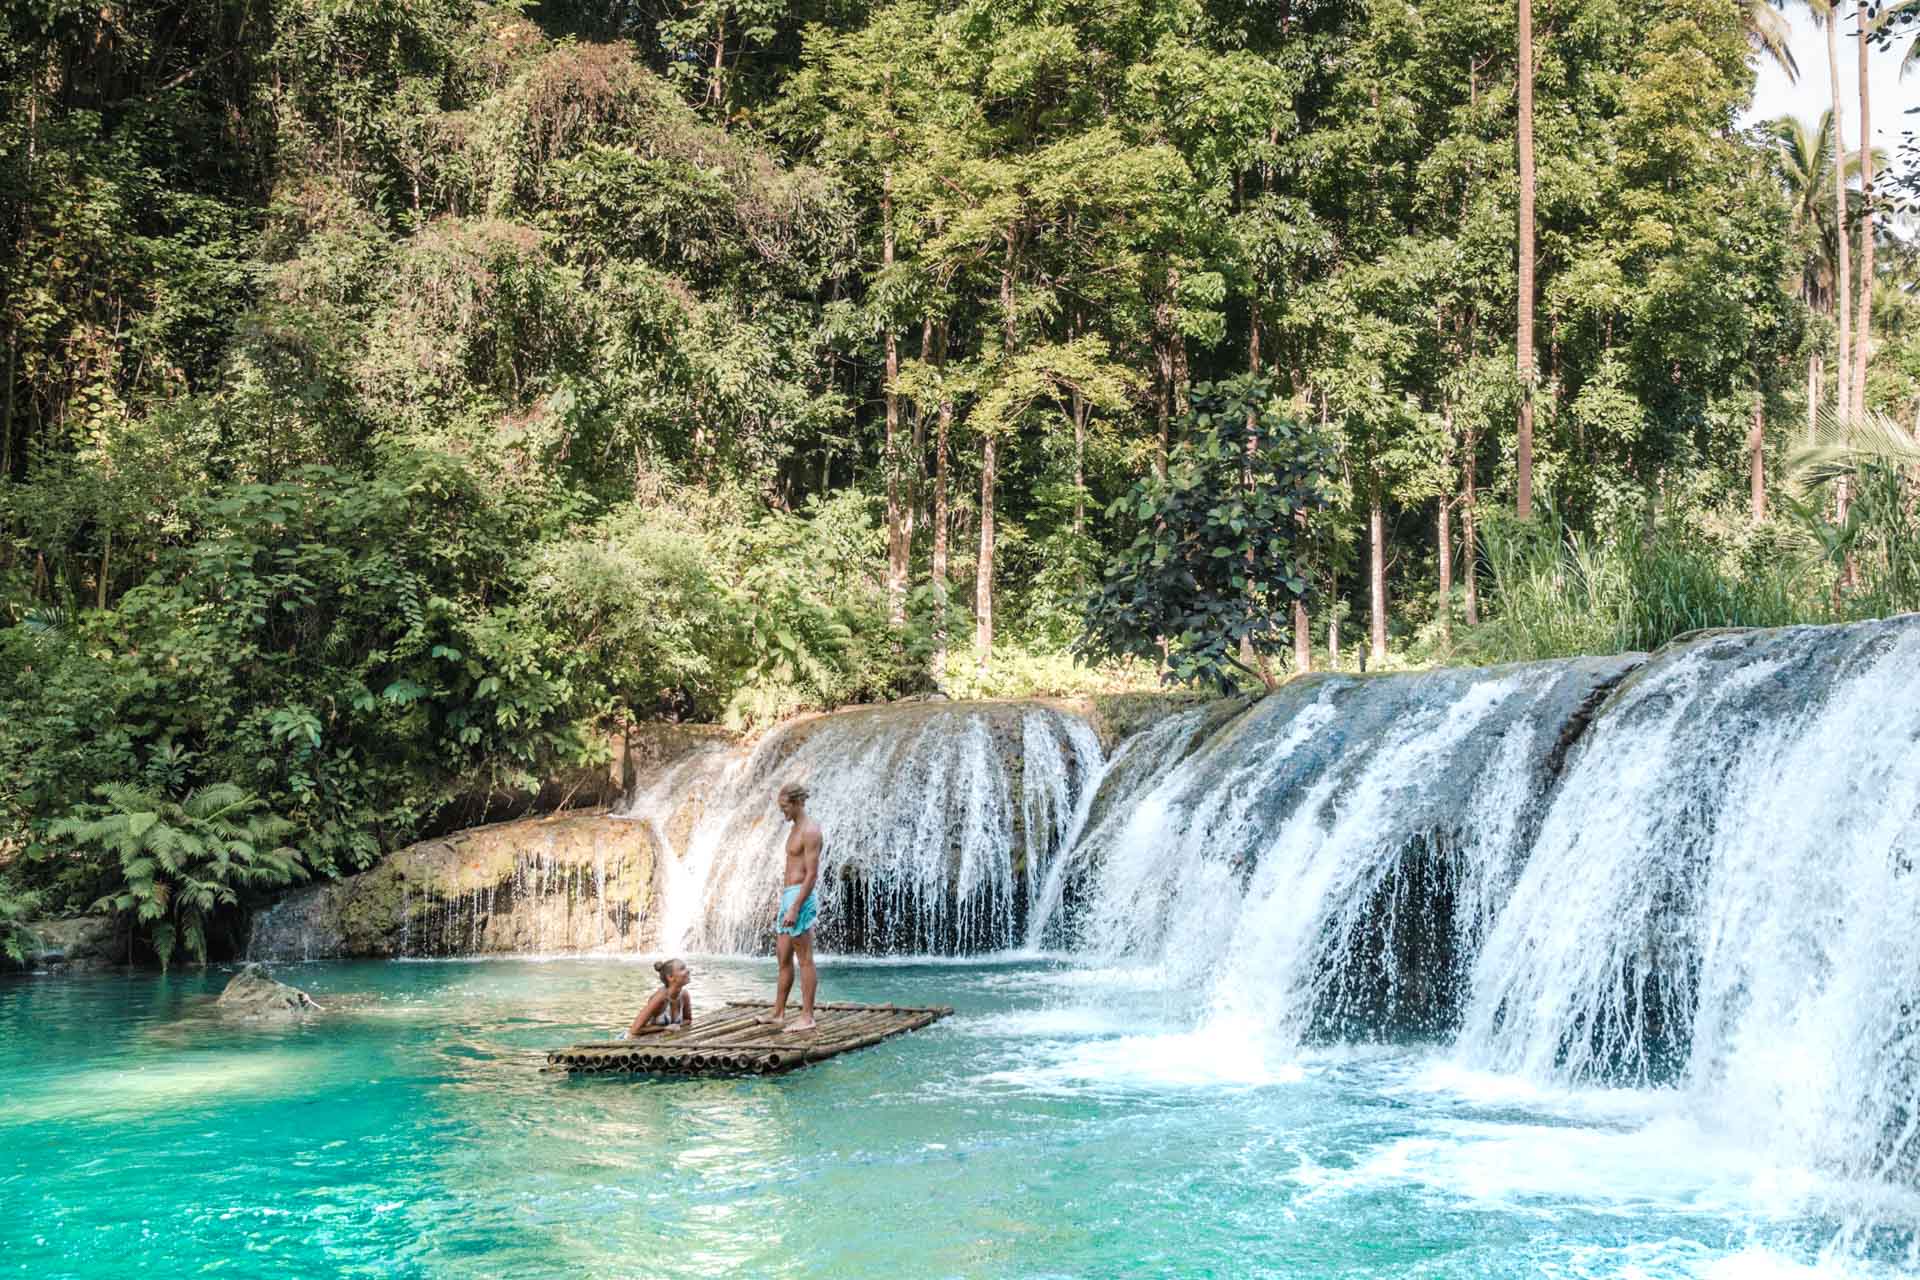 An Extensive Travel Guide to Siquijor: 11 Best Beaches, Waterfalls & Things To Do